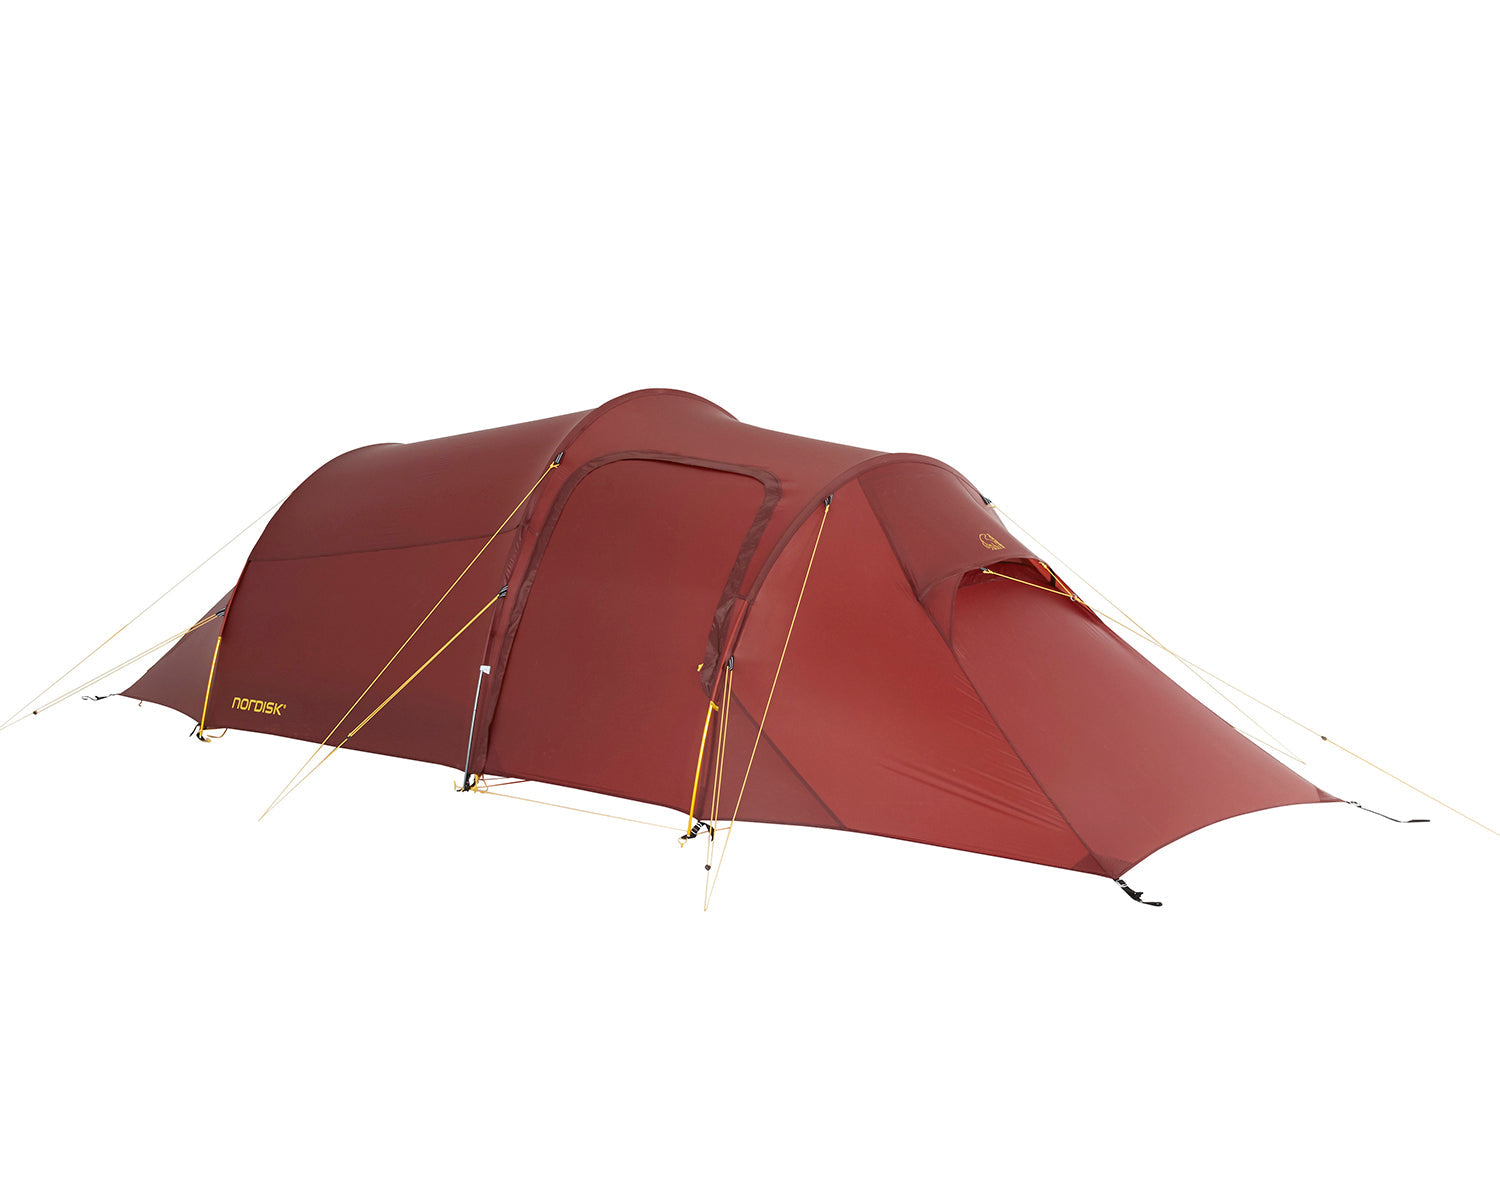 Oppland 2 LW telt - 2 person - Burnt Red